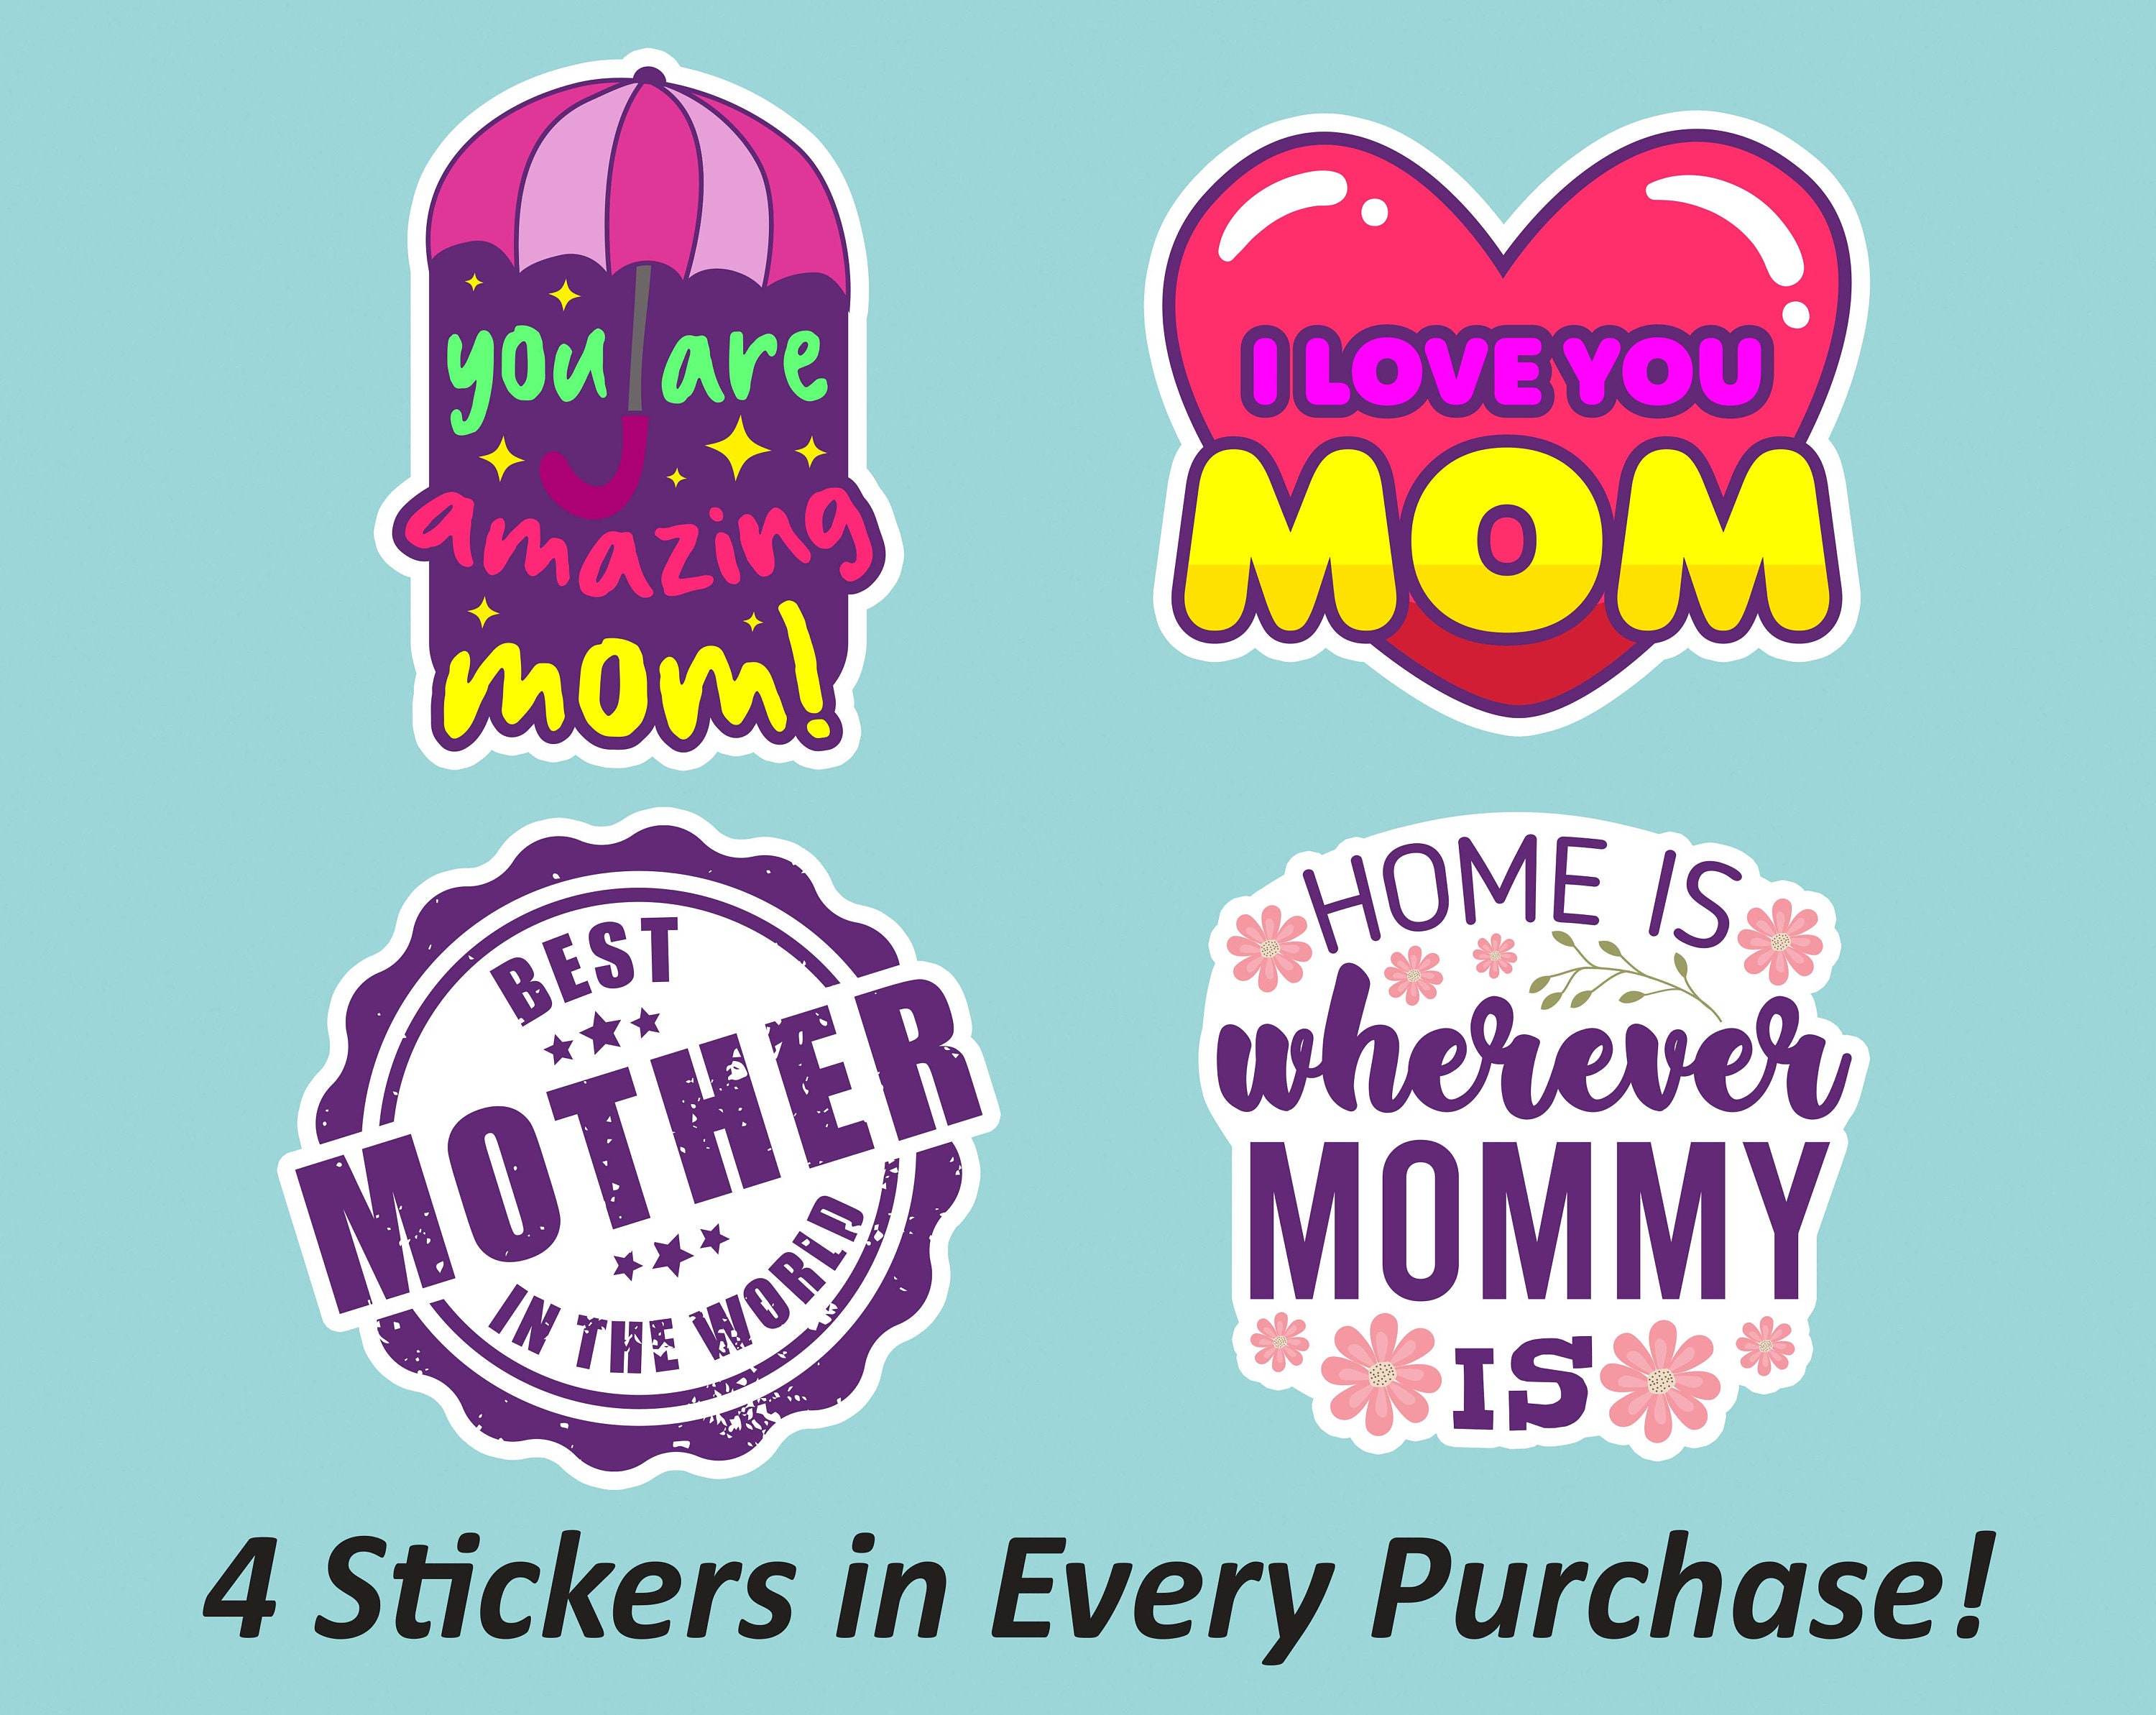 Best Mother Stickers Pack for Mom Mother's Day Craft Etsy UK